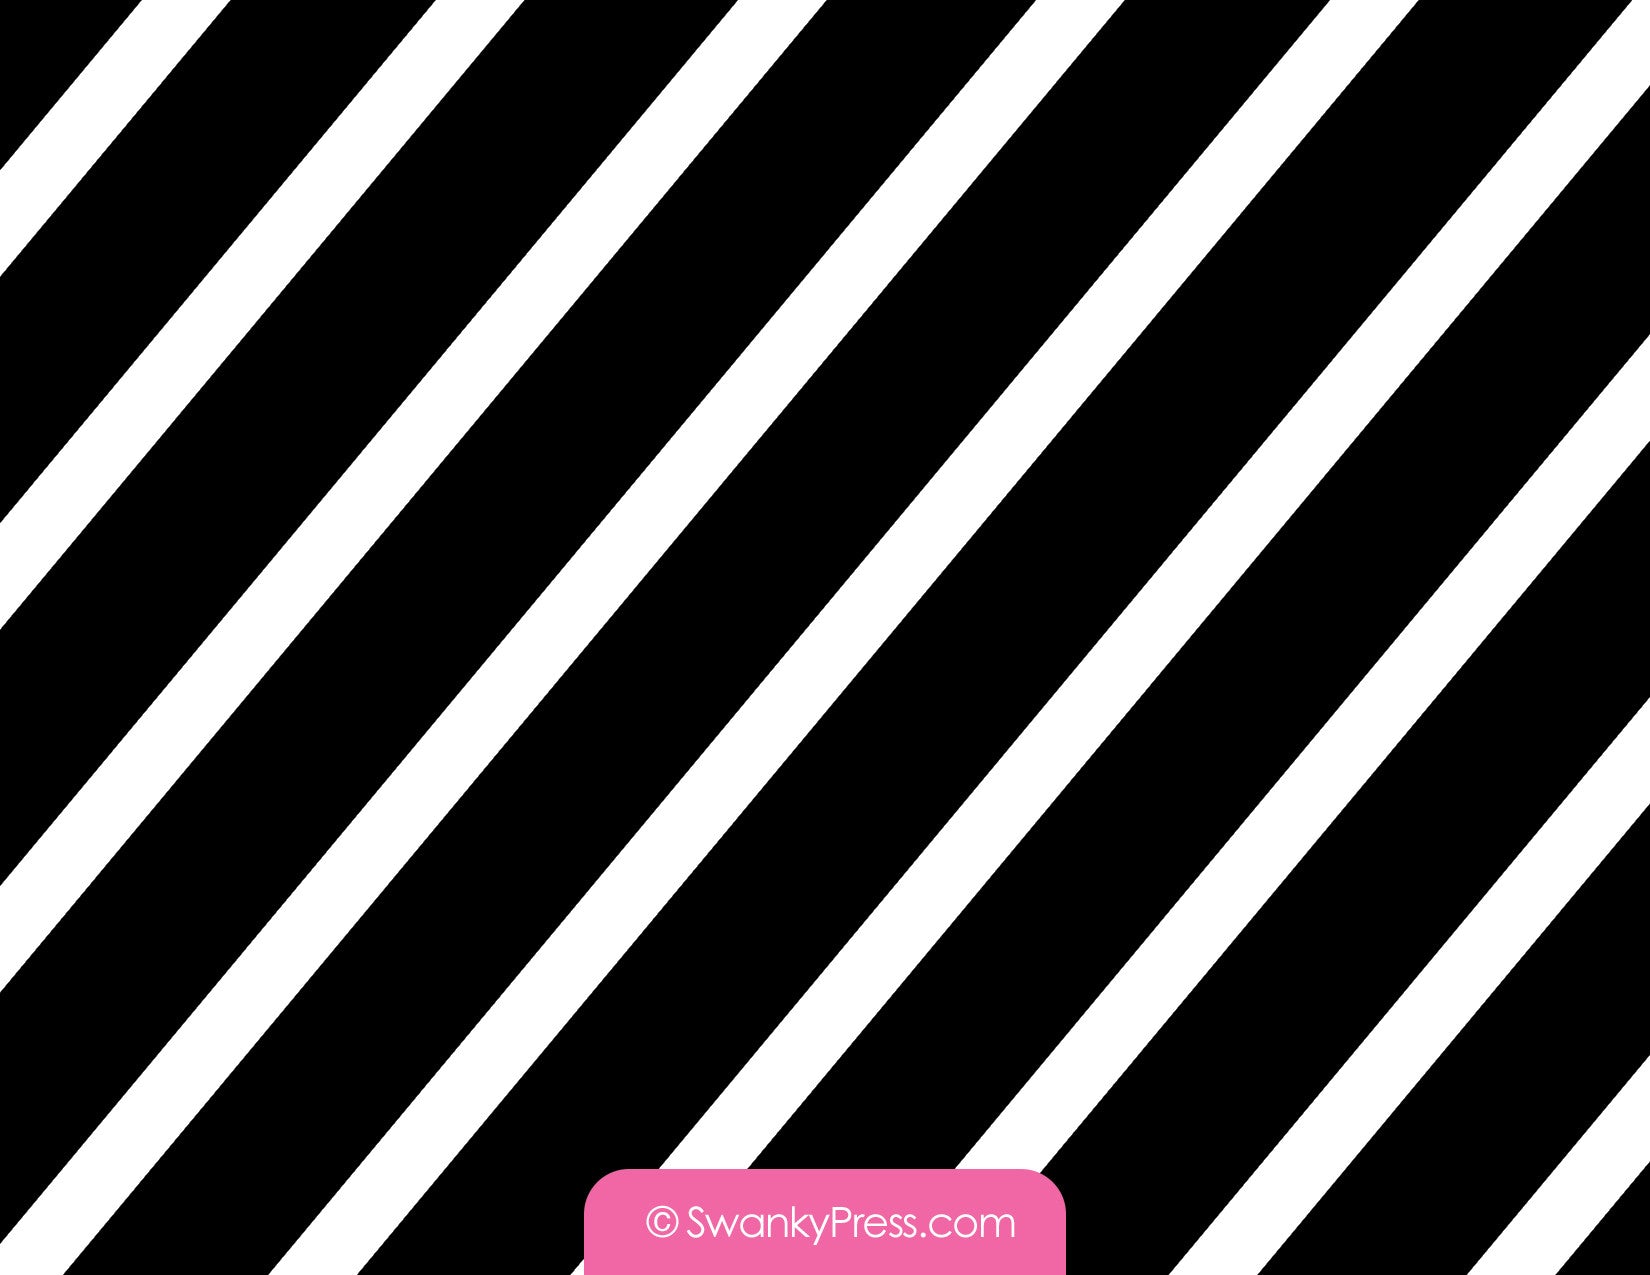 Panda party flat notecards in pink and black with stripes